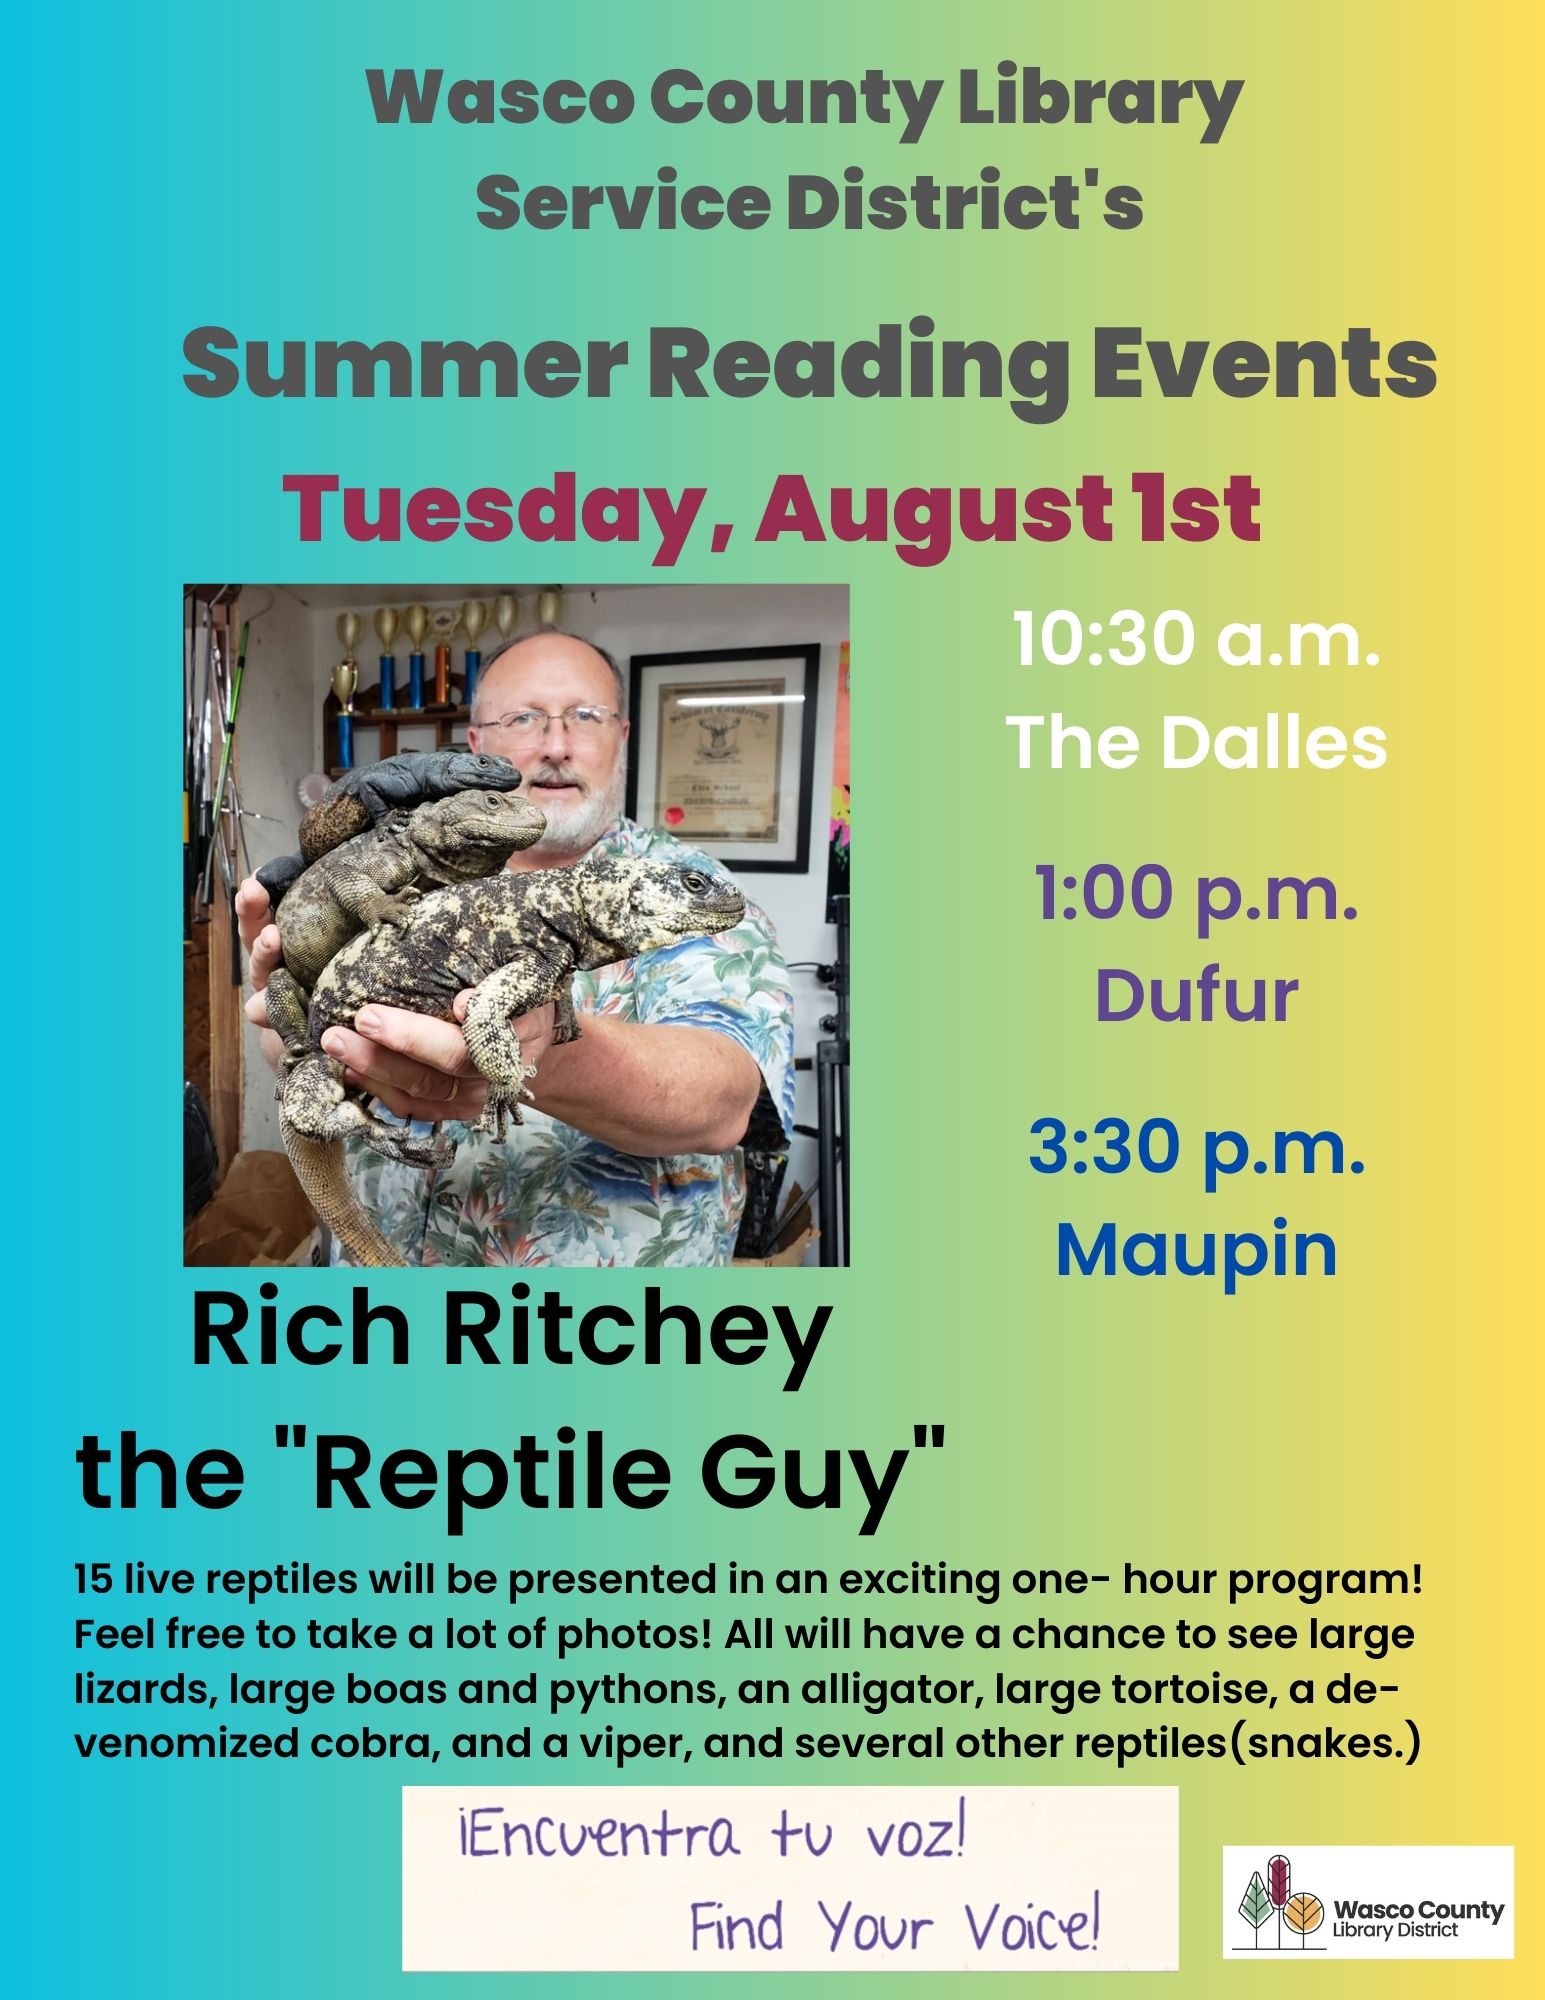 Summer Reading event - Rich Ritchey, the Reptile Guy